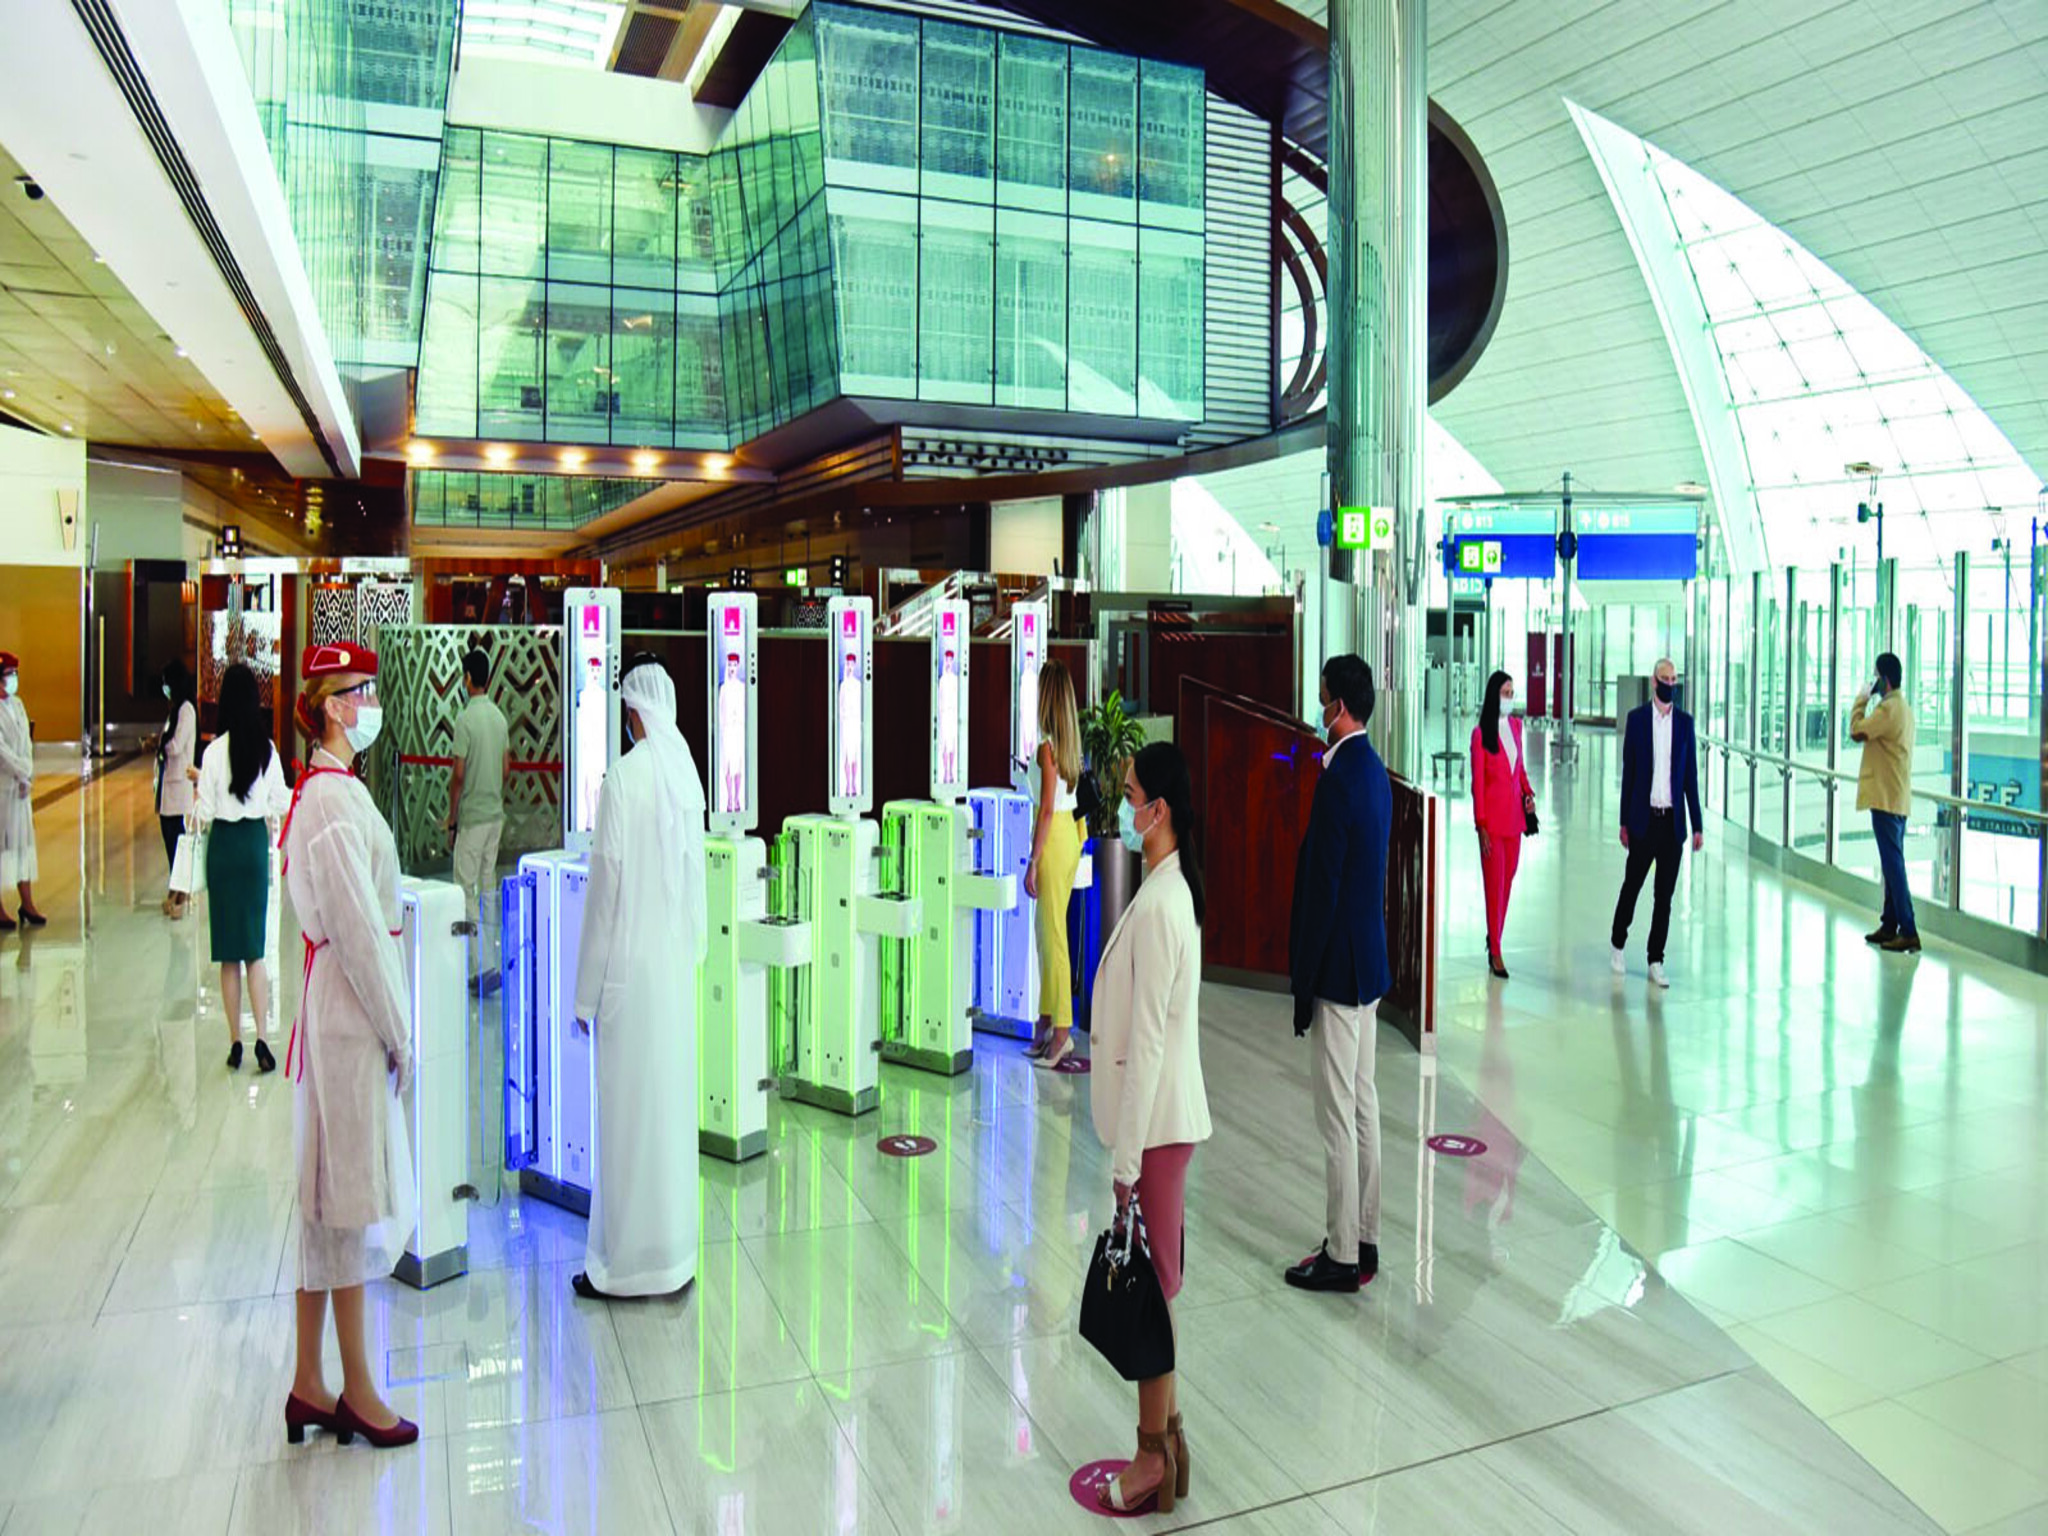 Dubai Airports issues important travel advice during the Eid Al Fitr holiday